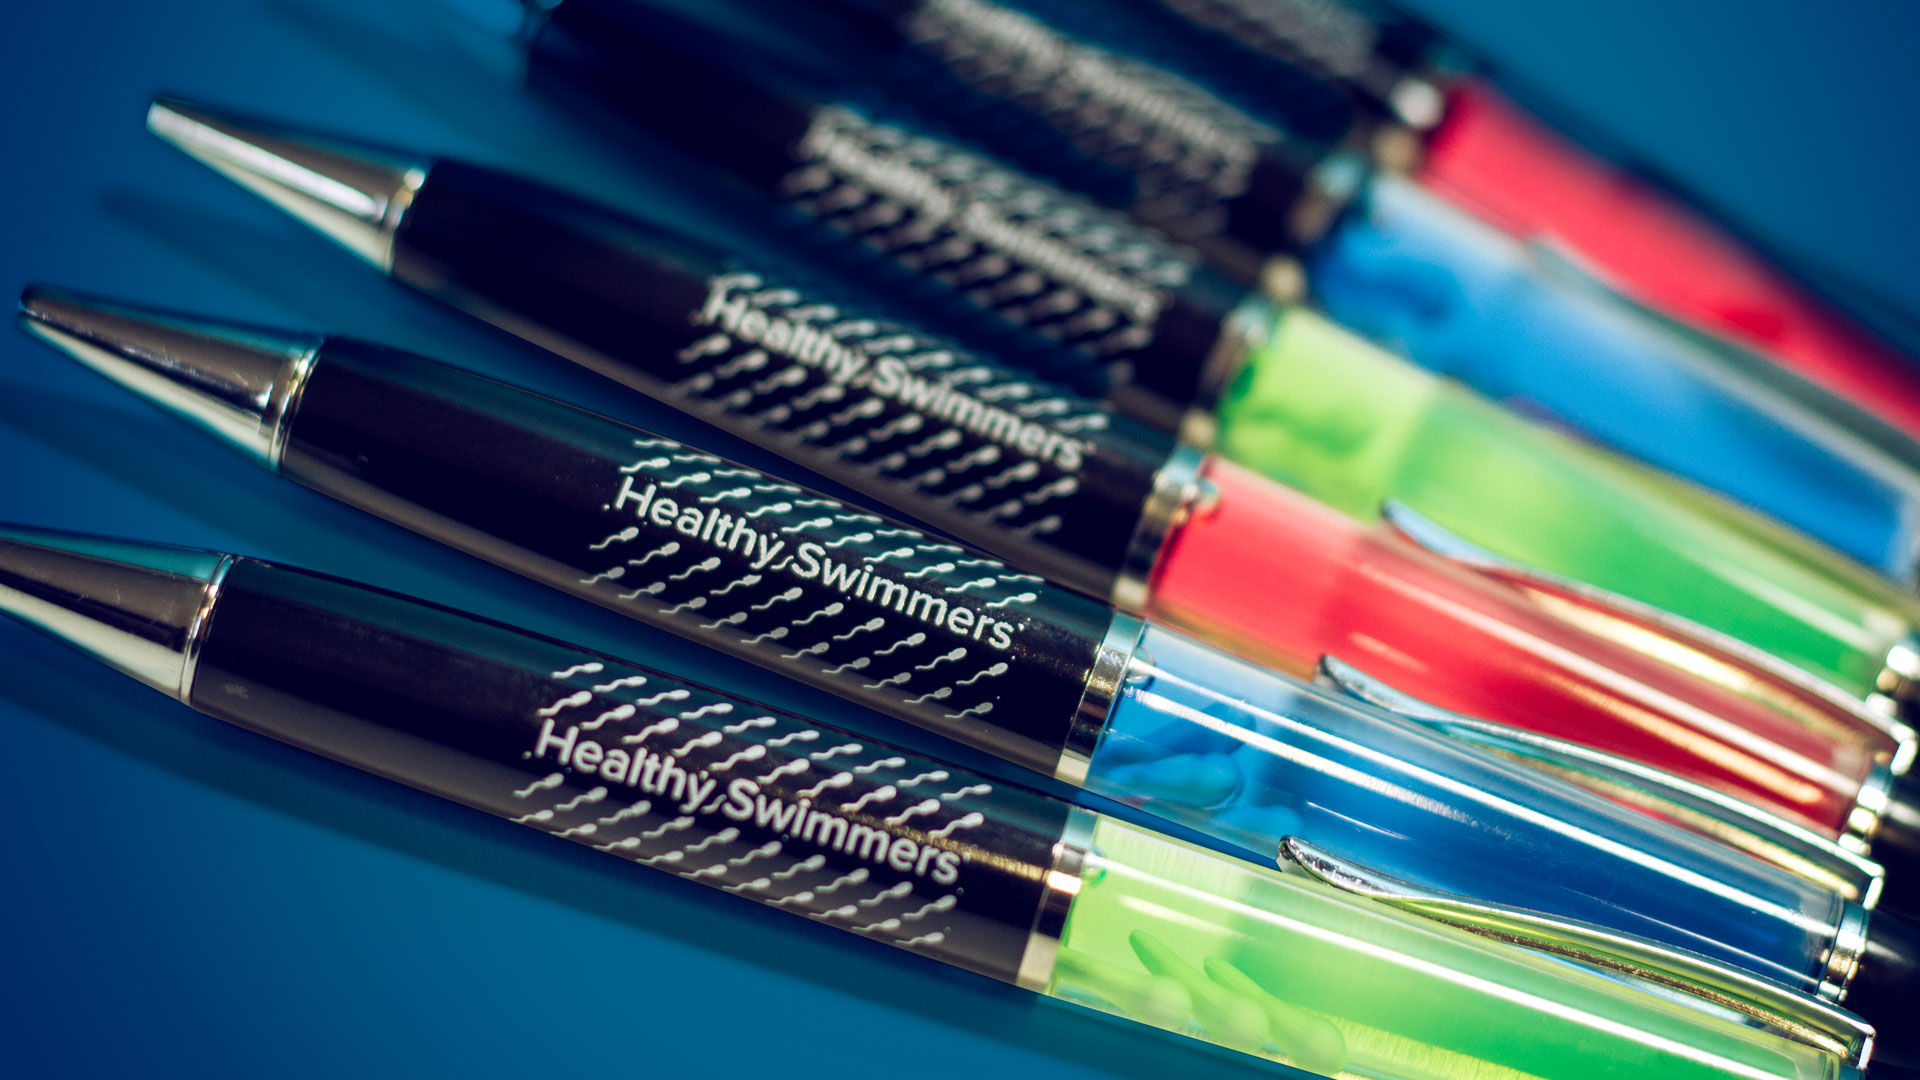 Healthy swimmers pens